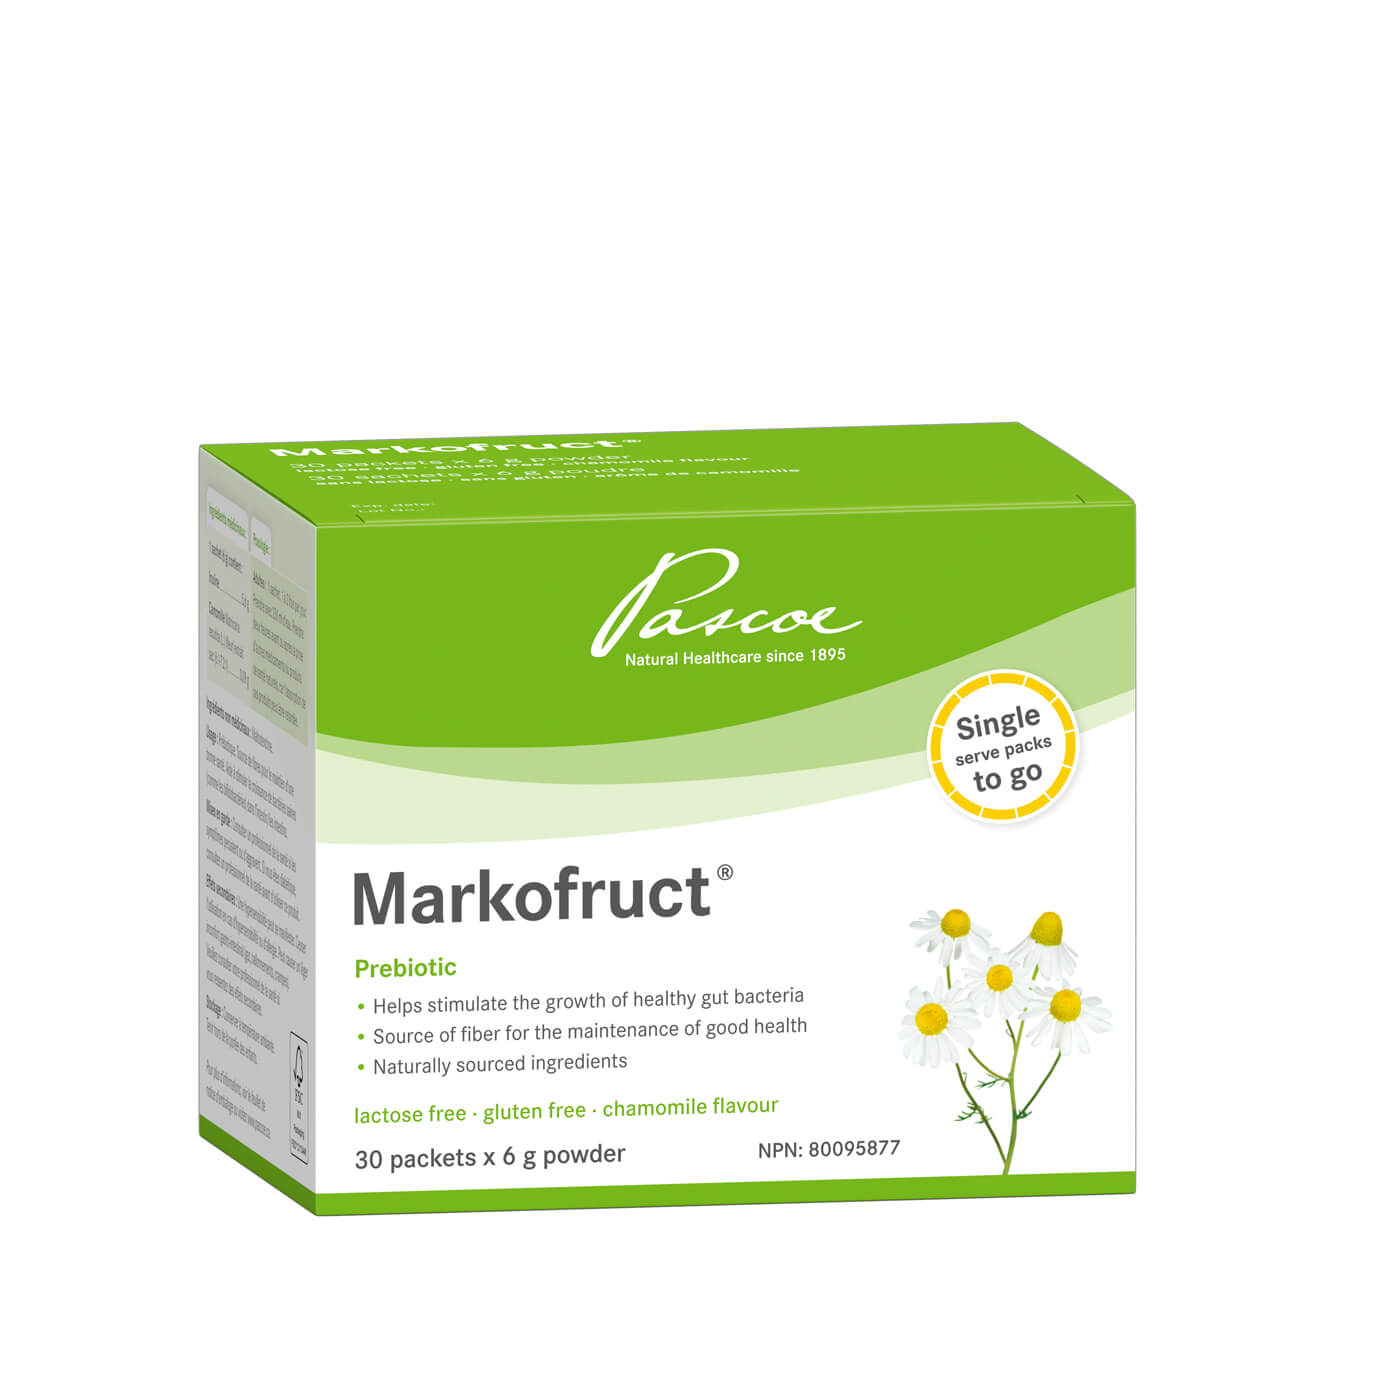 Pascoe Markofruct Prebiotic 6g 30 packets